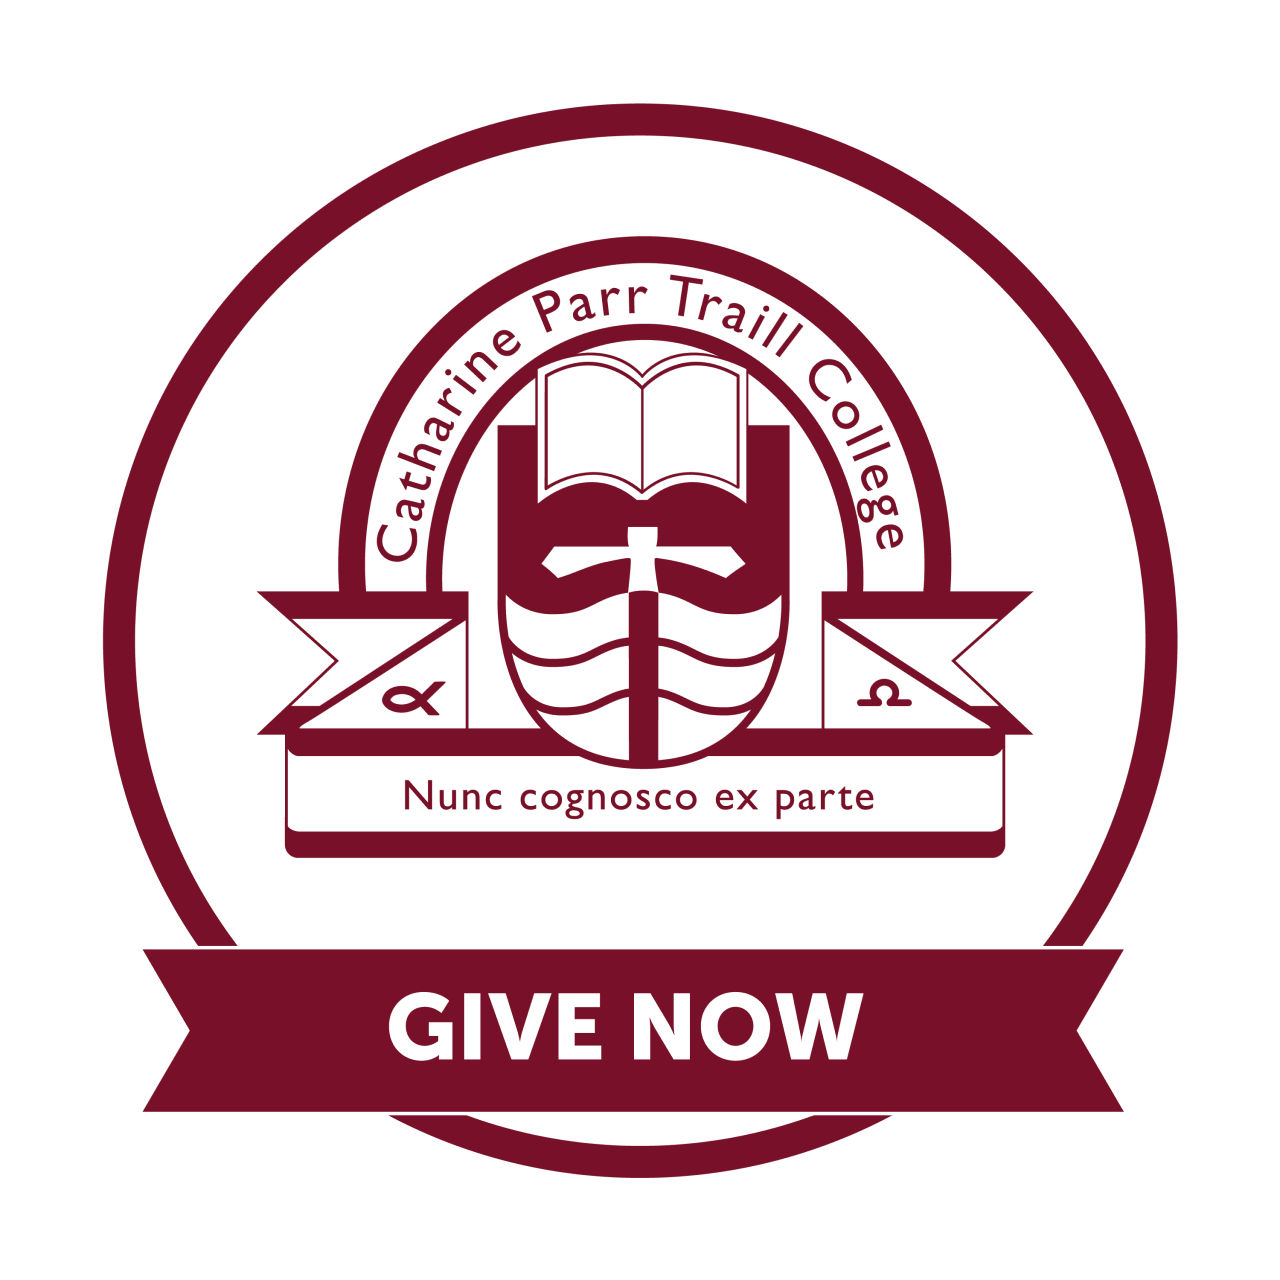 College Give Now Button